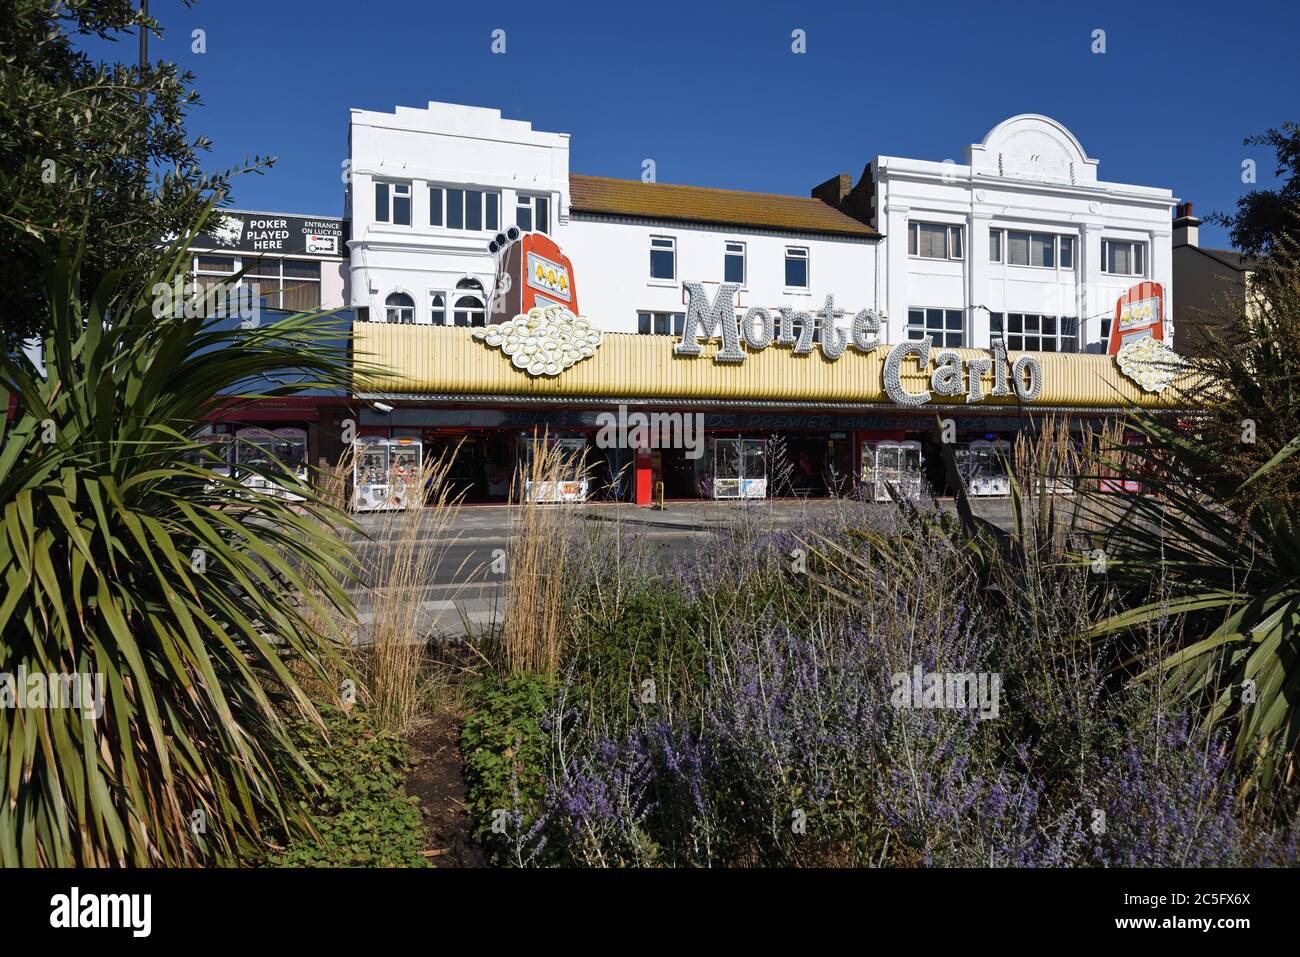 Monte Carlo amusement arcade on the Golden Mile at Southend on Sea Essex overlooks the River Thames and estuary. Stock Photo